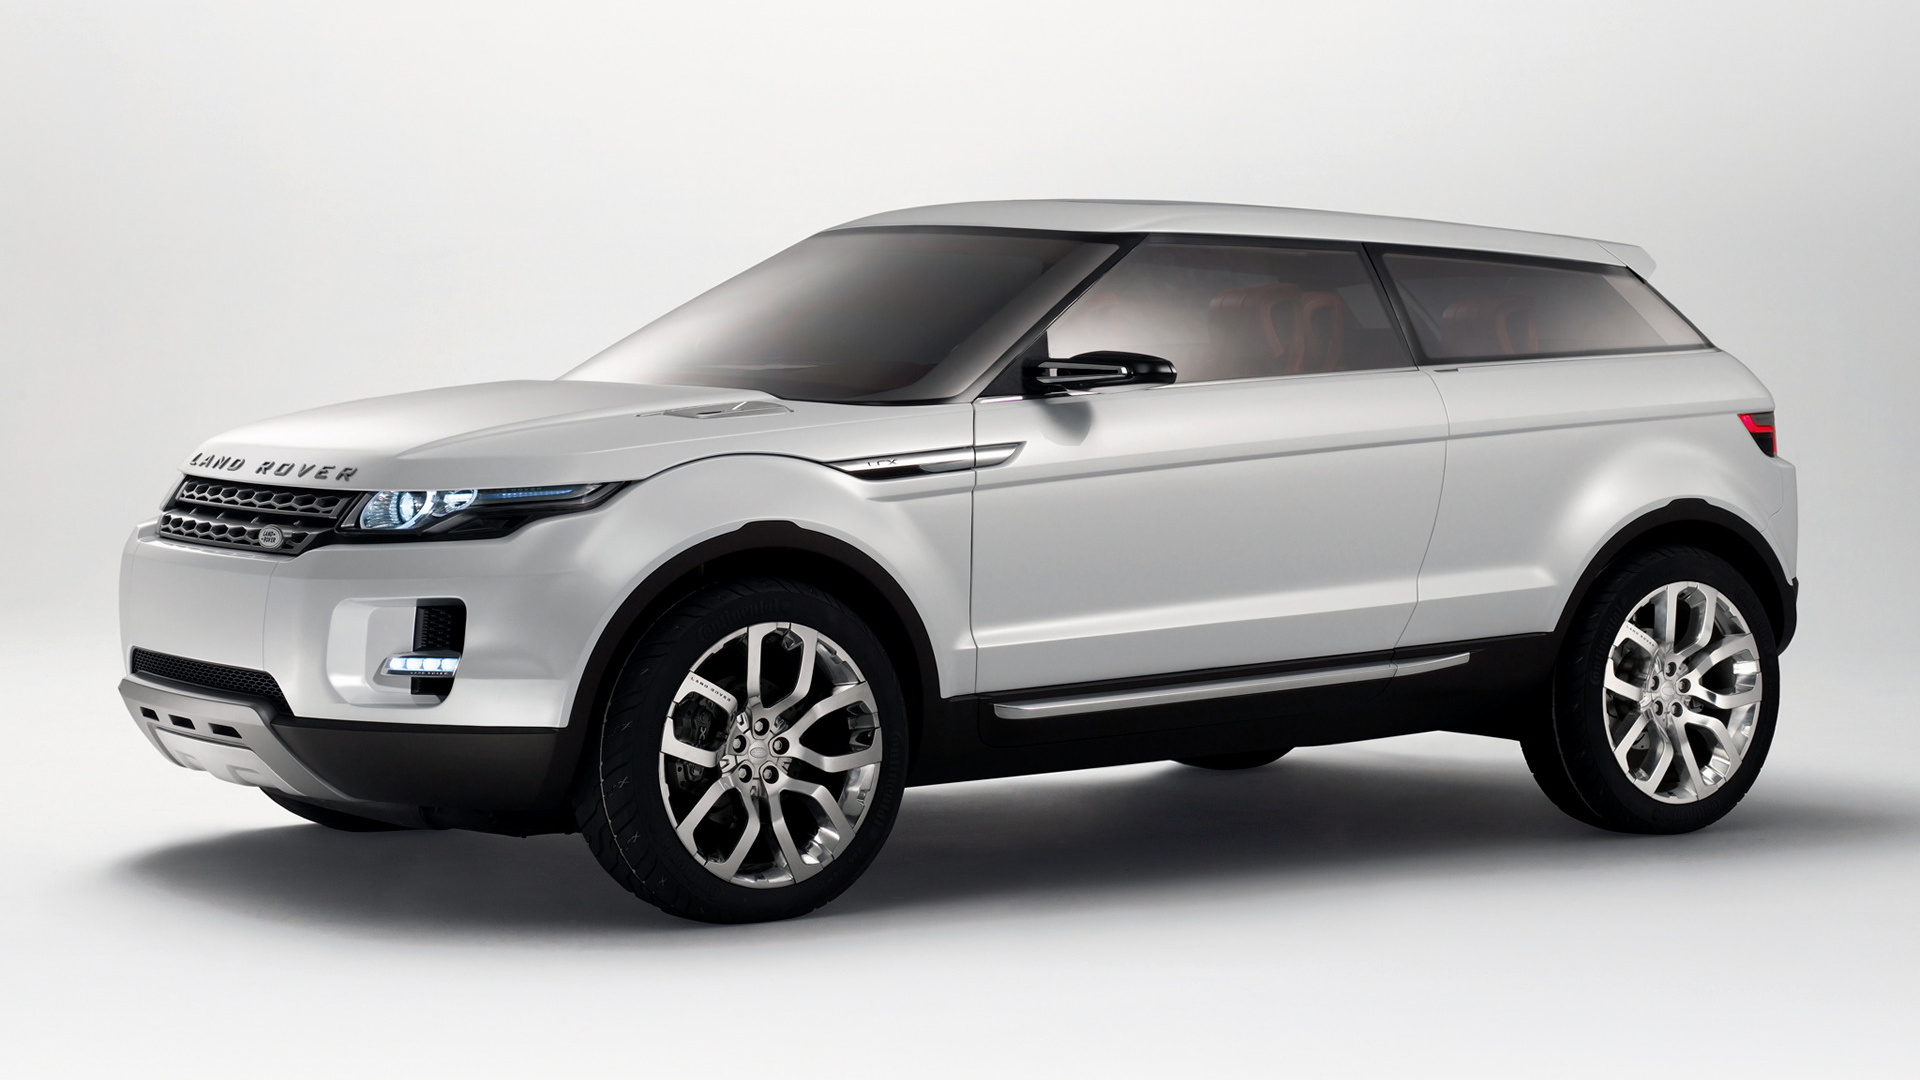 2008 Land Rover LRX Concept Wallpapers and HD Images